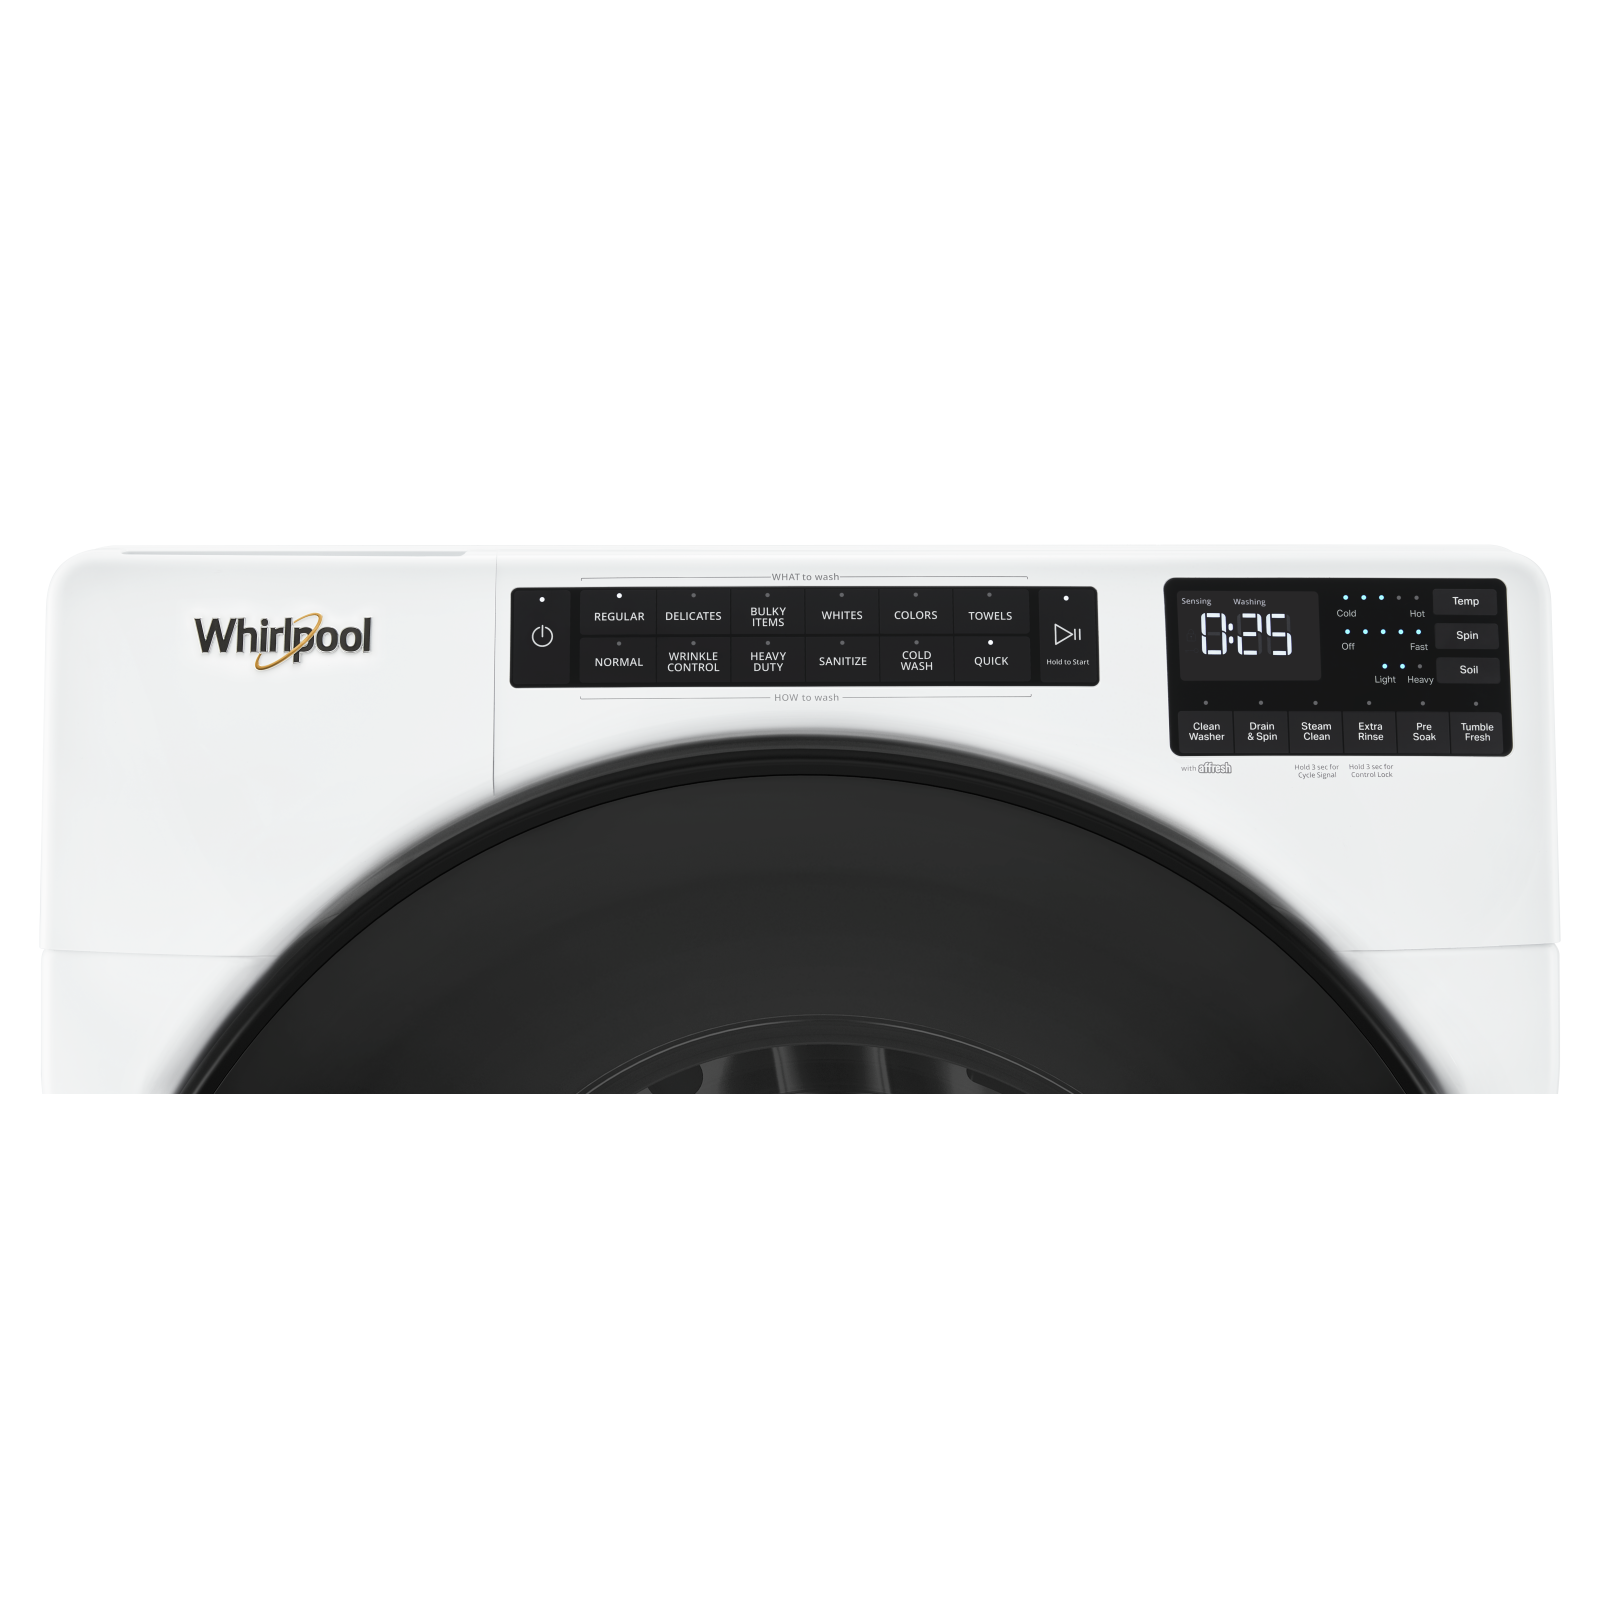 Whirlpool - 5.8 cu. Ft  Front Load Washer in White - WFW6605MW